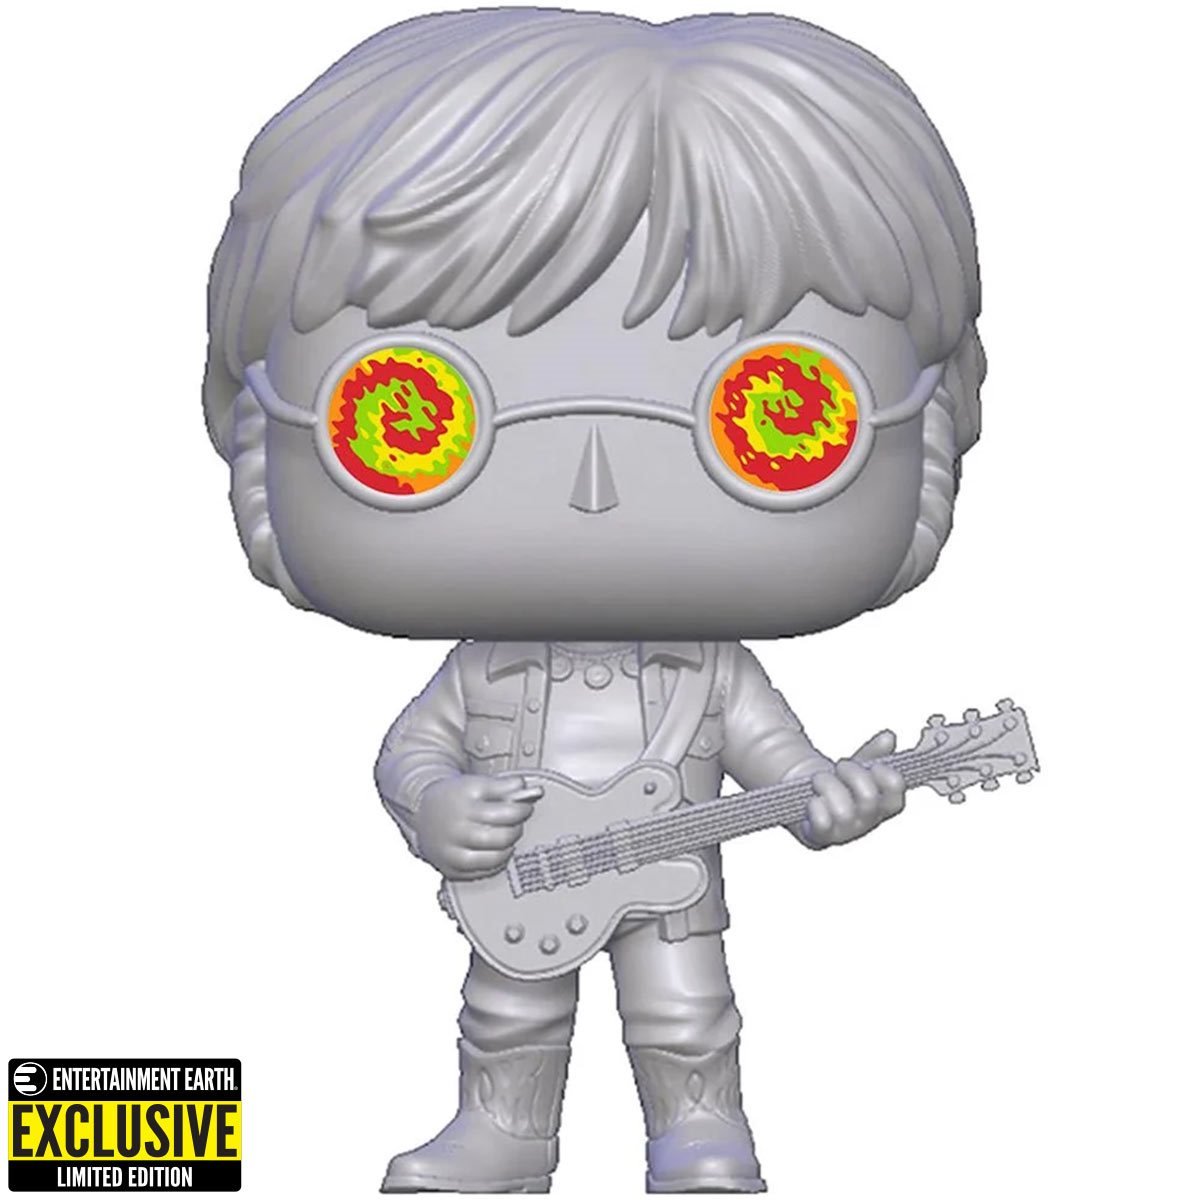 John Lennon with Psychedelic Shades Pop! Figure